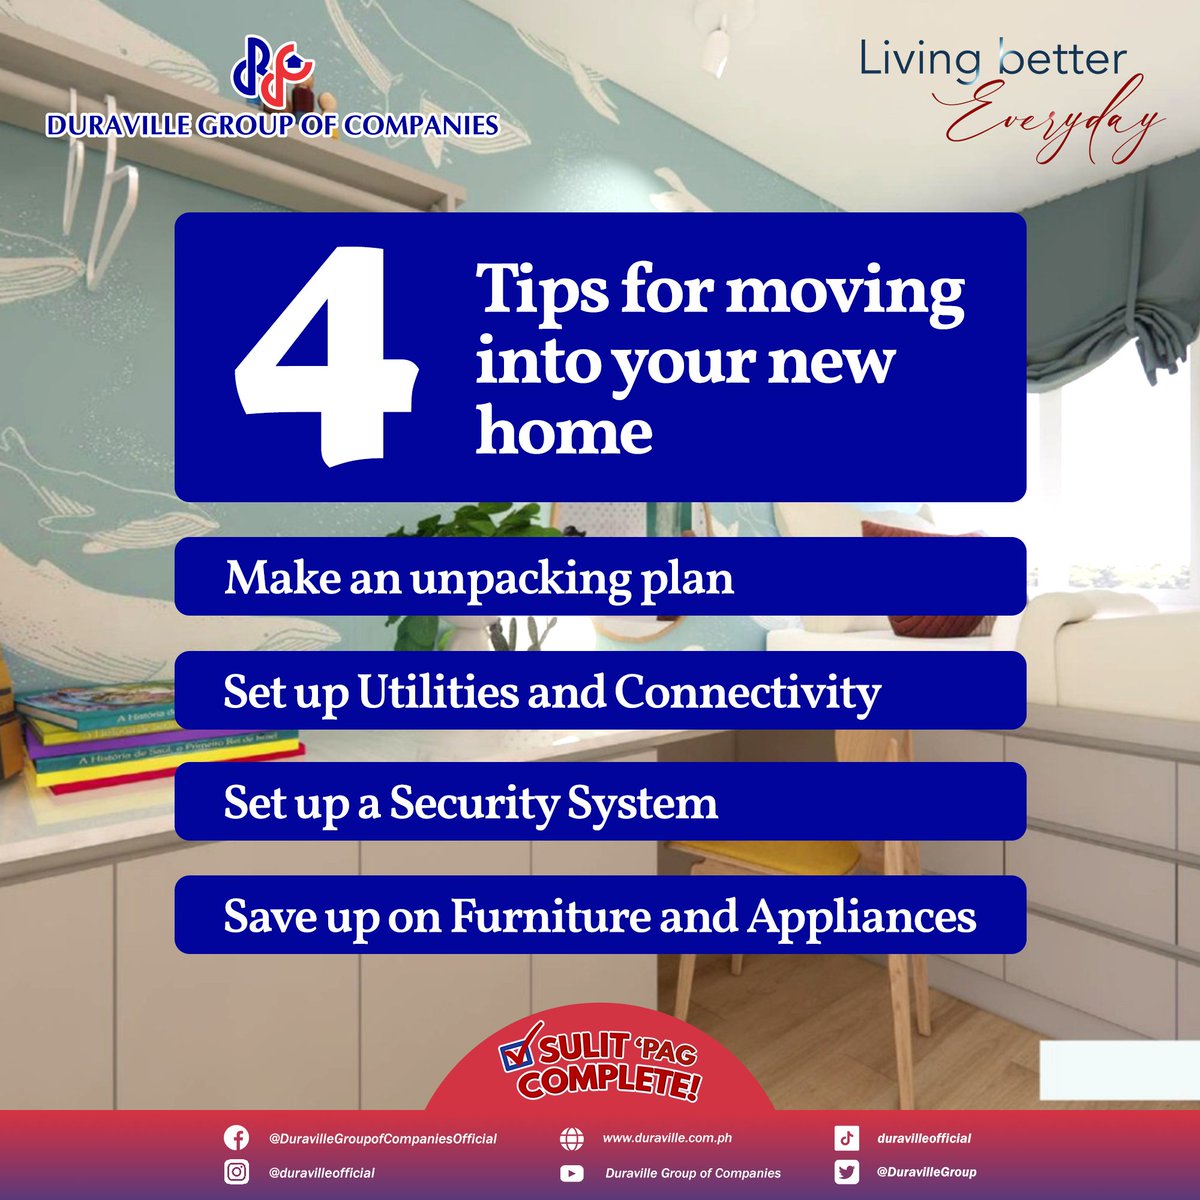 Moving is hard work, but it can be made easier by following a few simple steps. Here are our top four tips on getting settled in your new home!

#Duraville #LivingBetterEveryday #SulitPagComplete #RealEstatePH #Apartment #Condo #HouseAndLot #AffordableHome